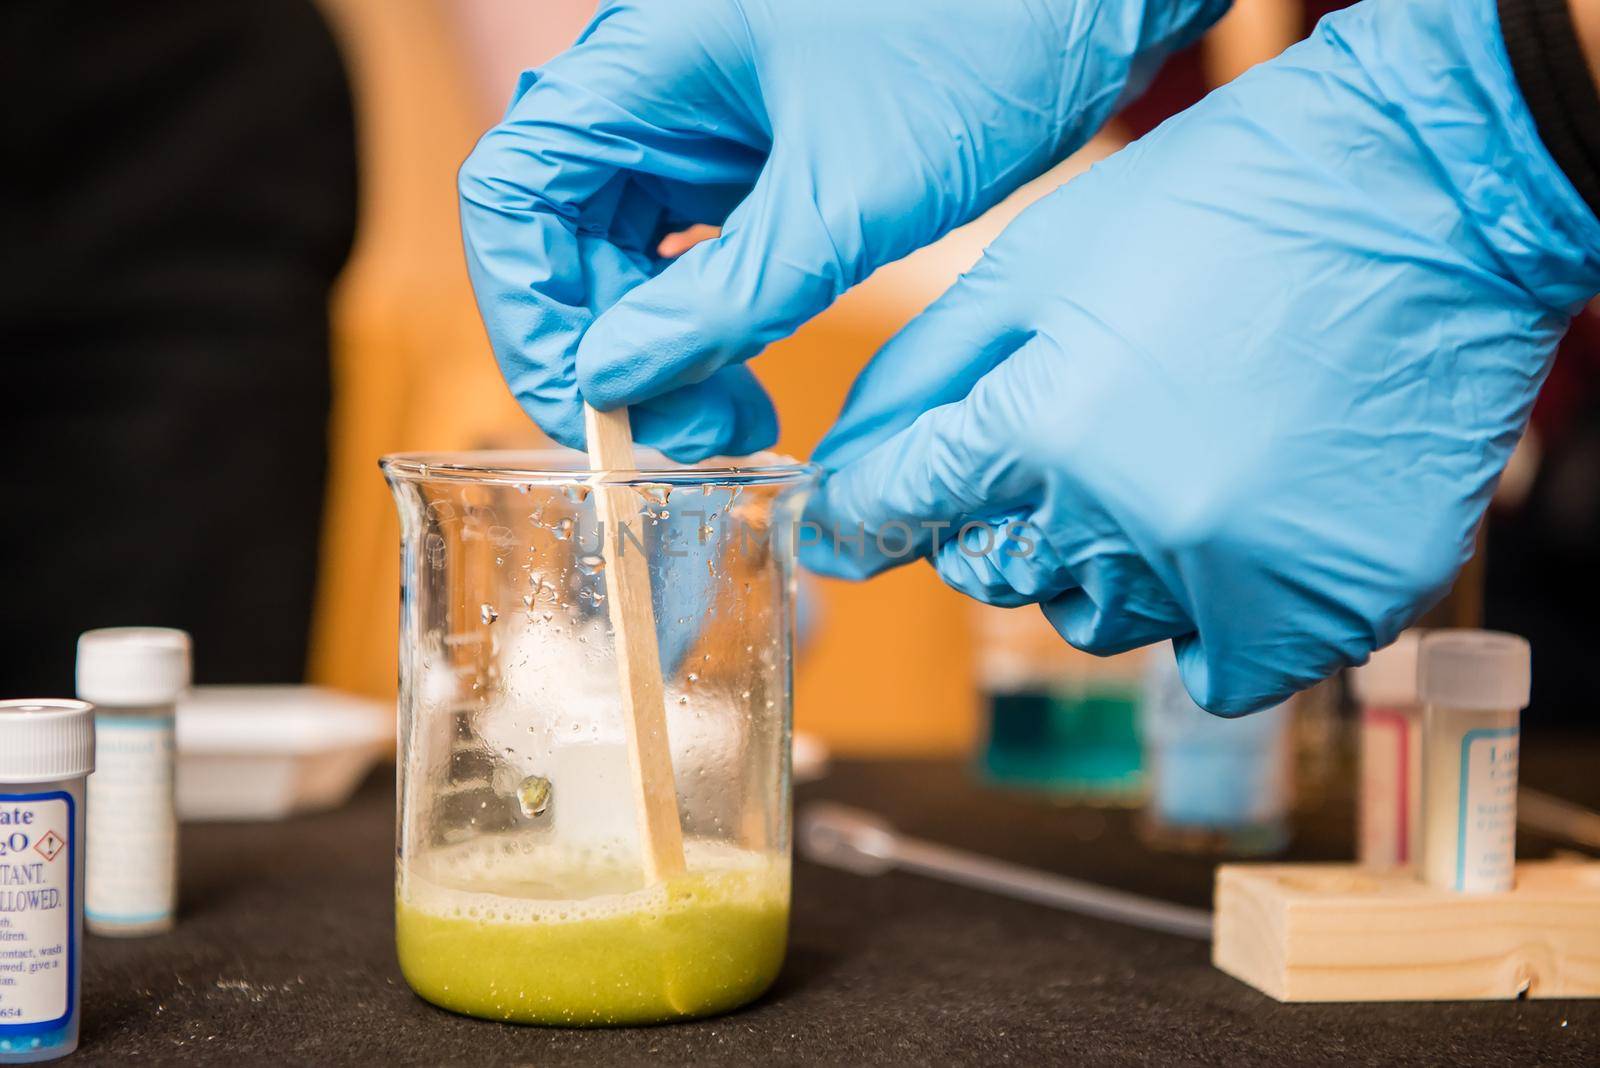 Up close view of scientist wearing blue latex gloves stirring green liquid in a chemistry glass.